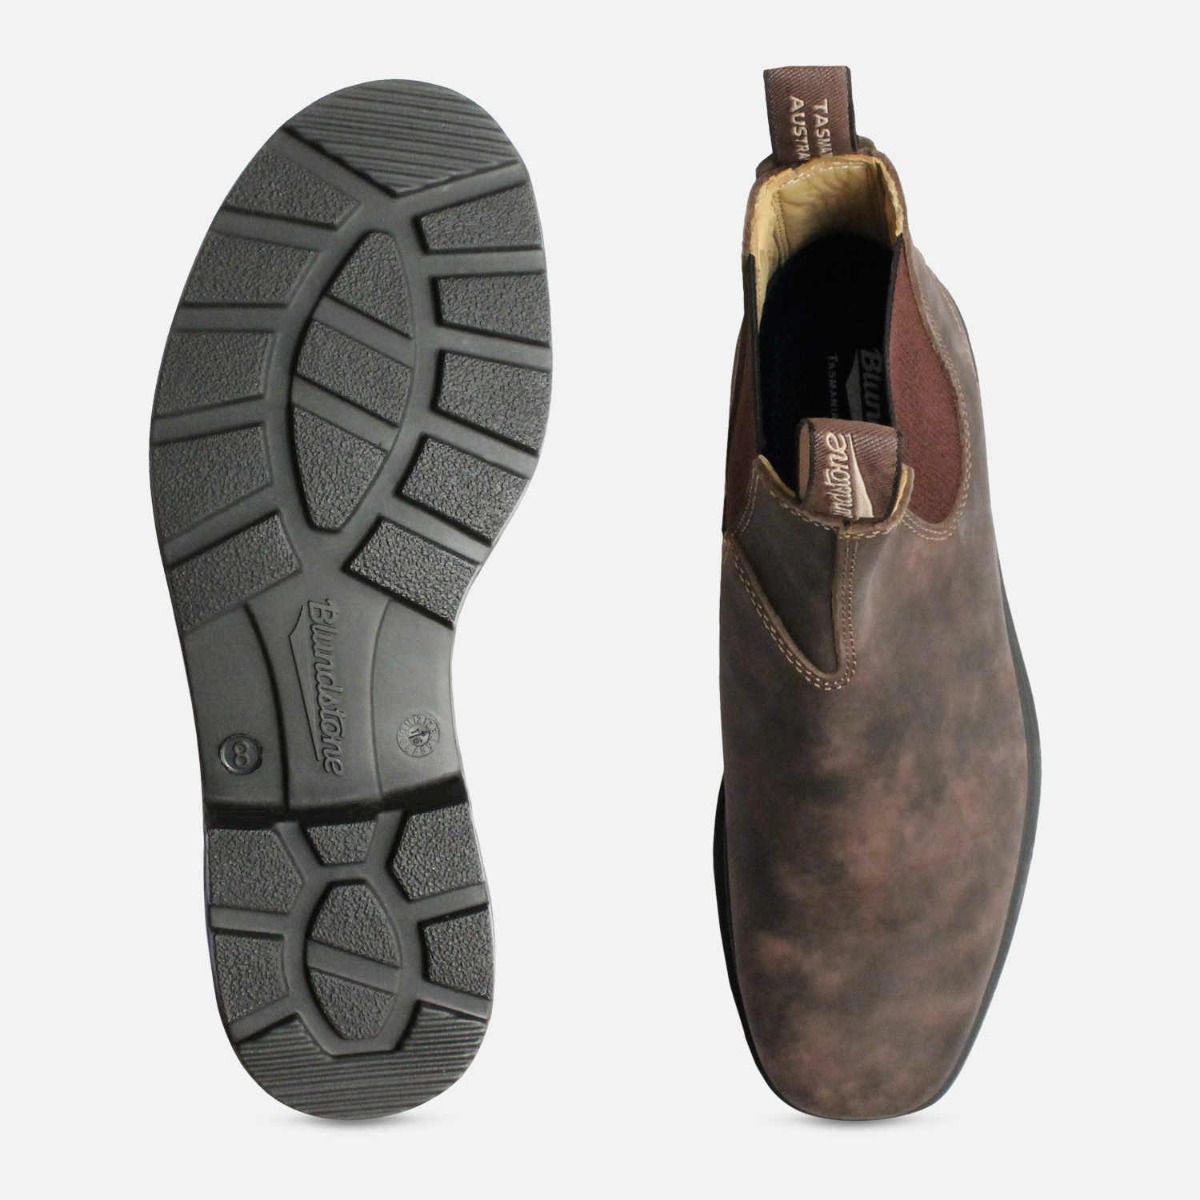 blundstone boots sale